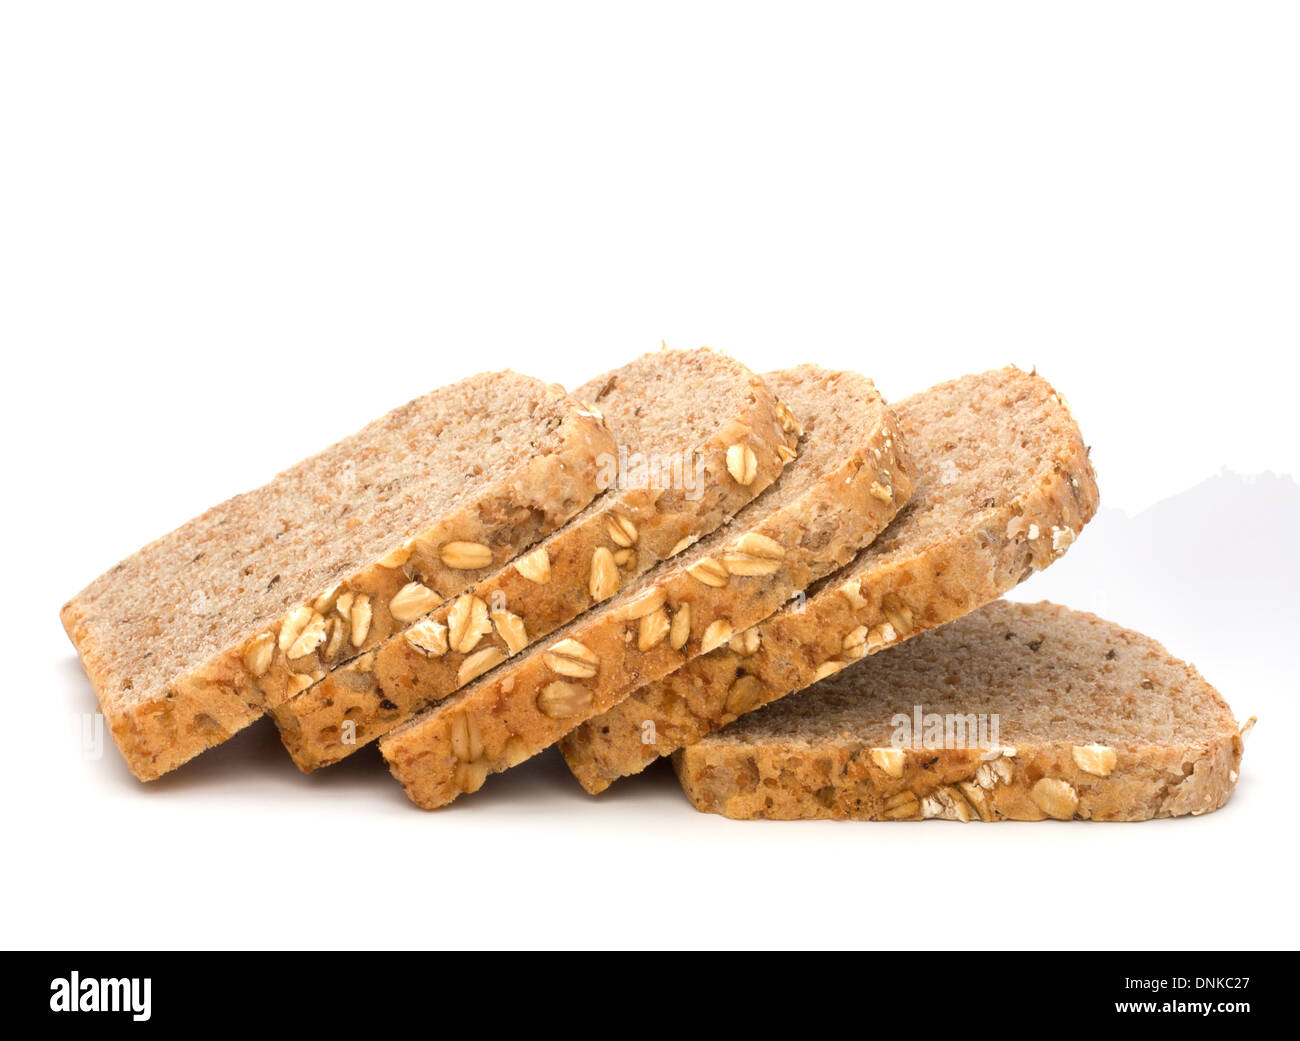 Healthy bran bread slices with rolled oats isolated on white background Stock Photo